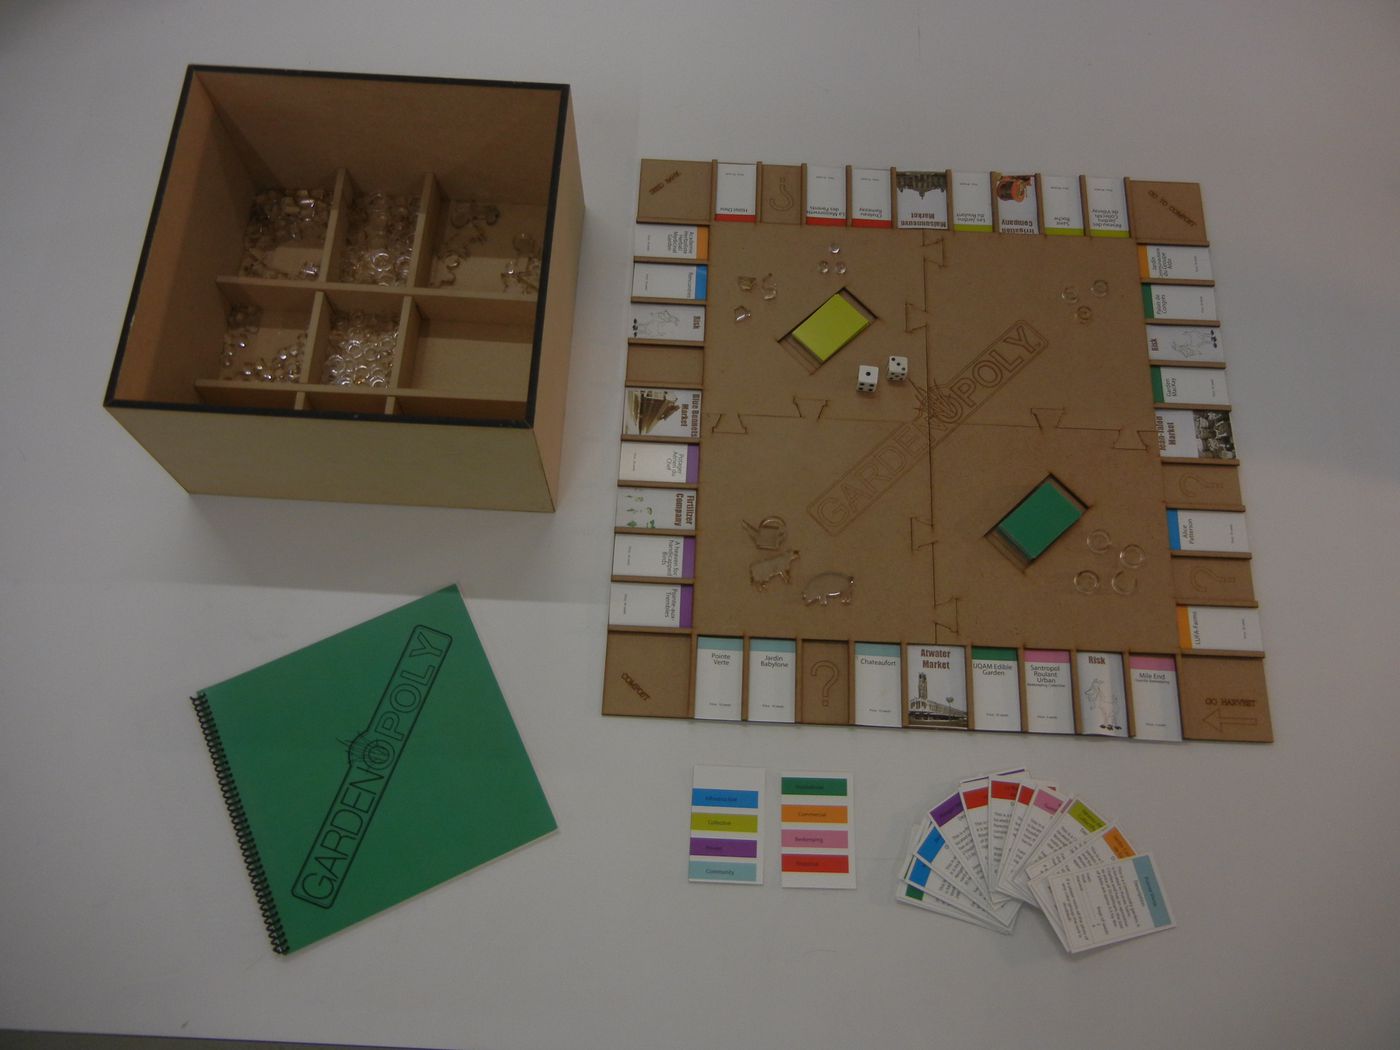 Board game on urban agriculture by students of Urban Seminar at the McGill School of Architecture